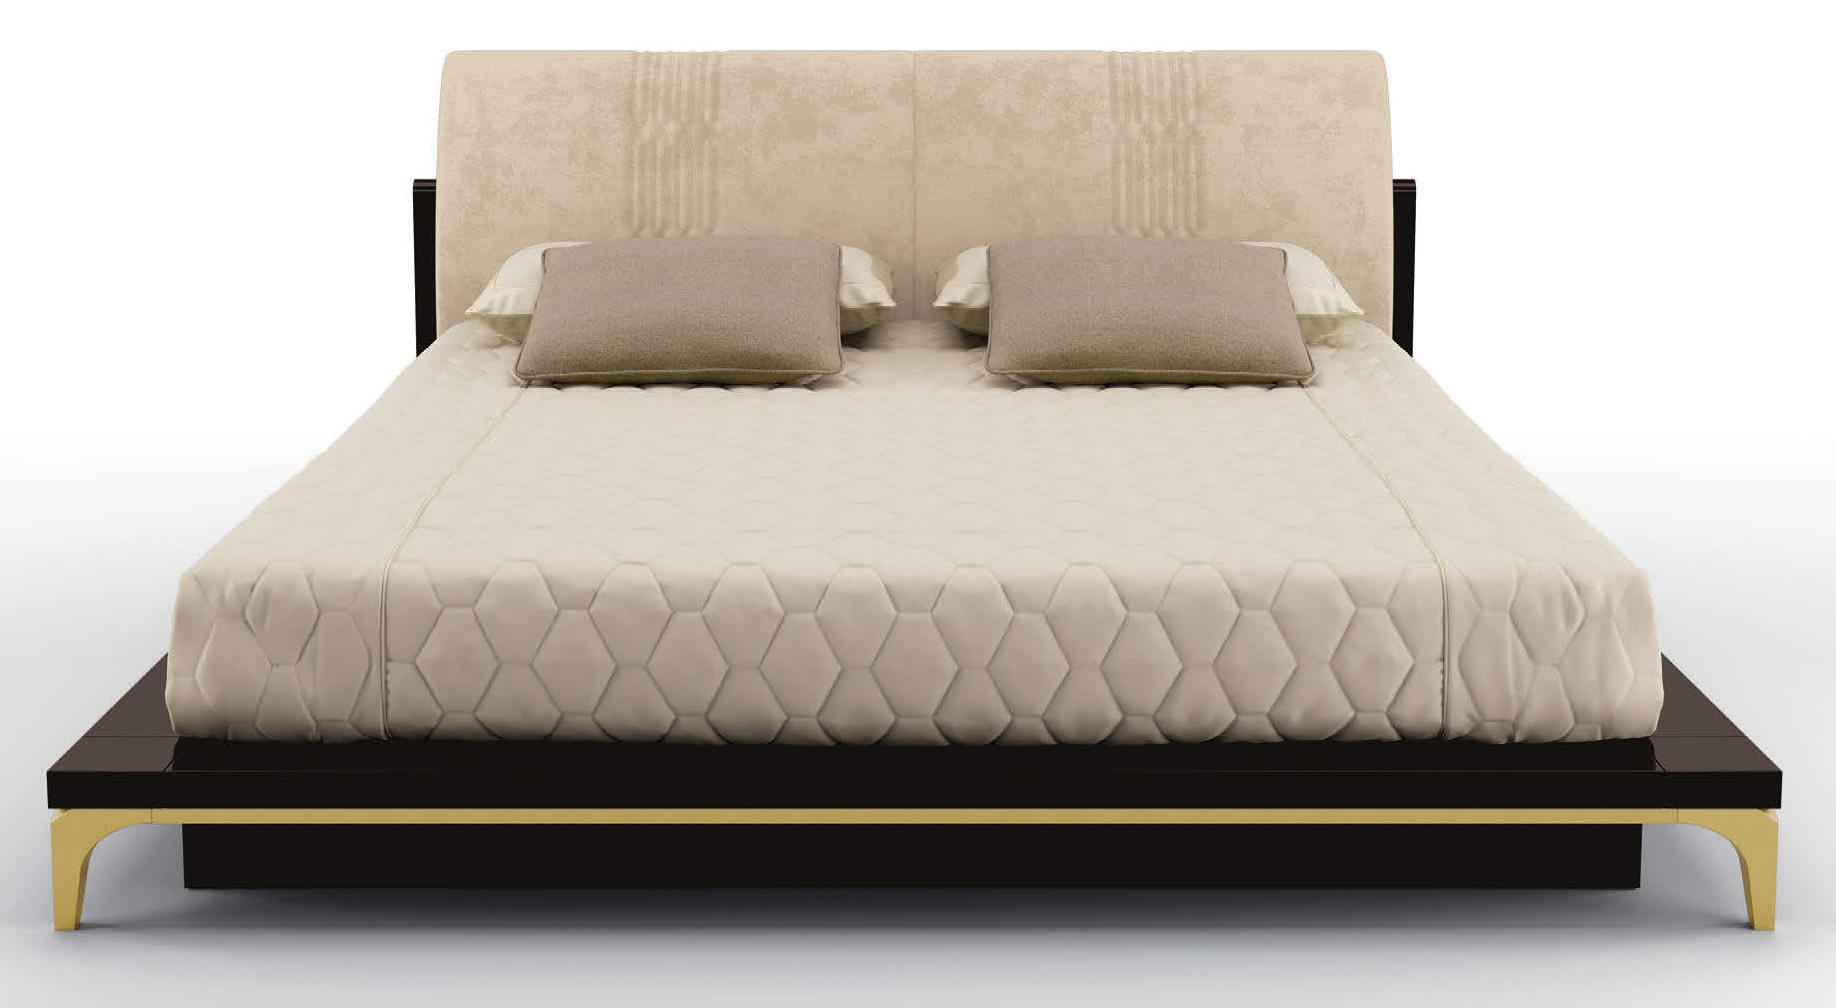 LUXURY BEDROOM FURNITURE Luxurious Summer Nights in the City King Size Bed